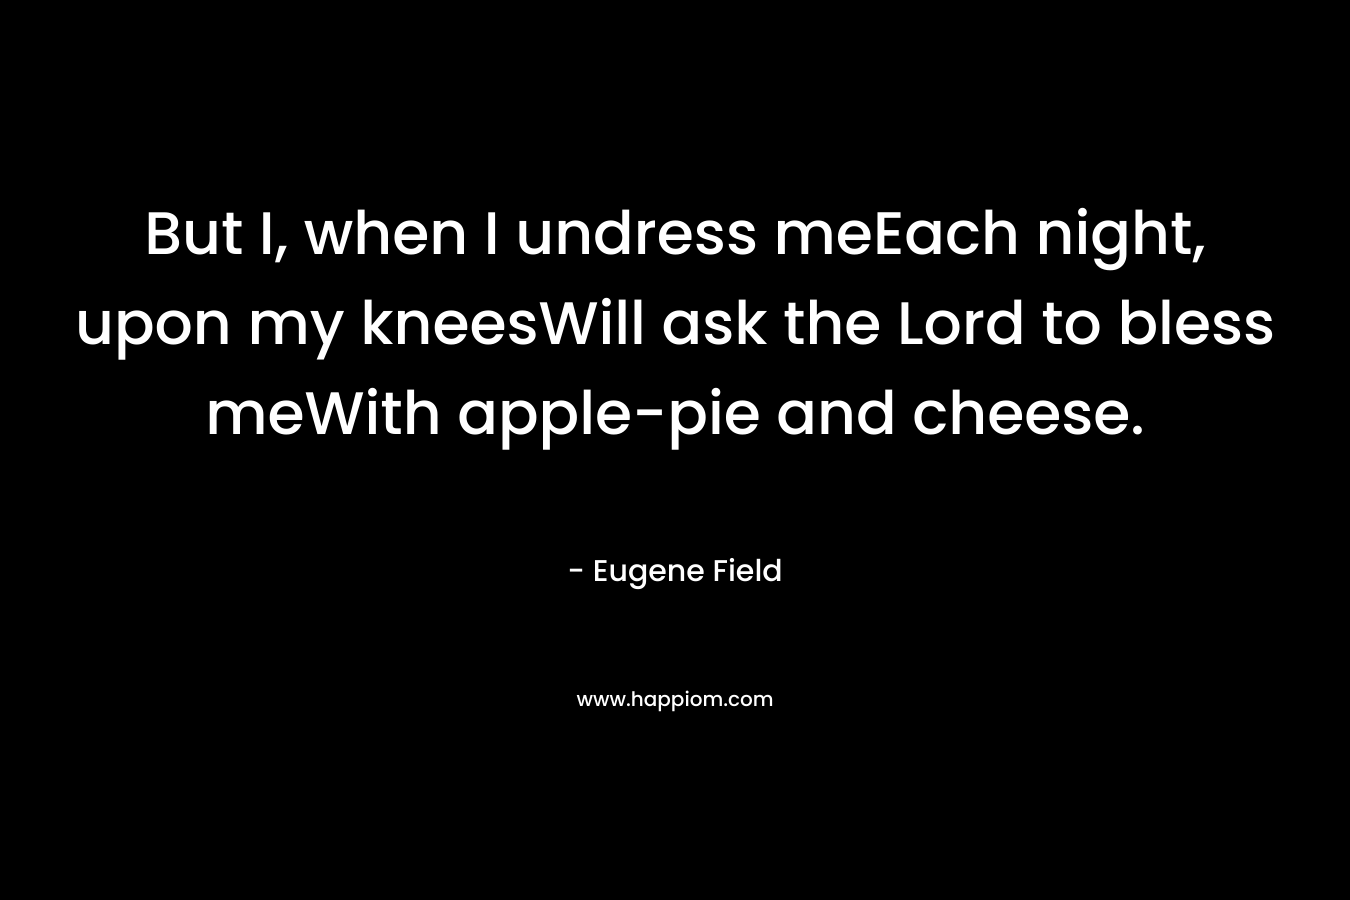 But I, when I undress meEach night, upon my kneesWill ask the Lord to bless meWith apple-pie and cheese.